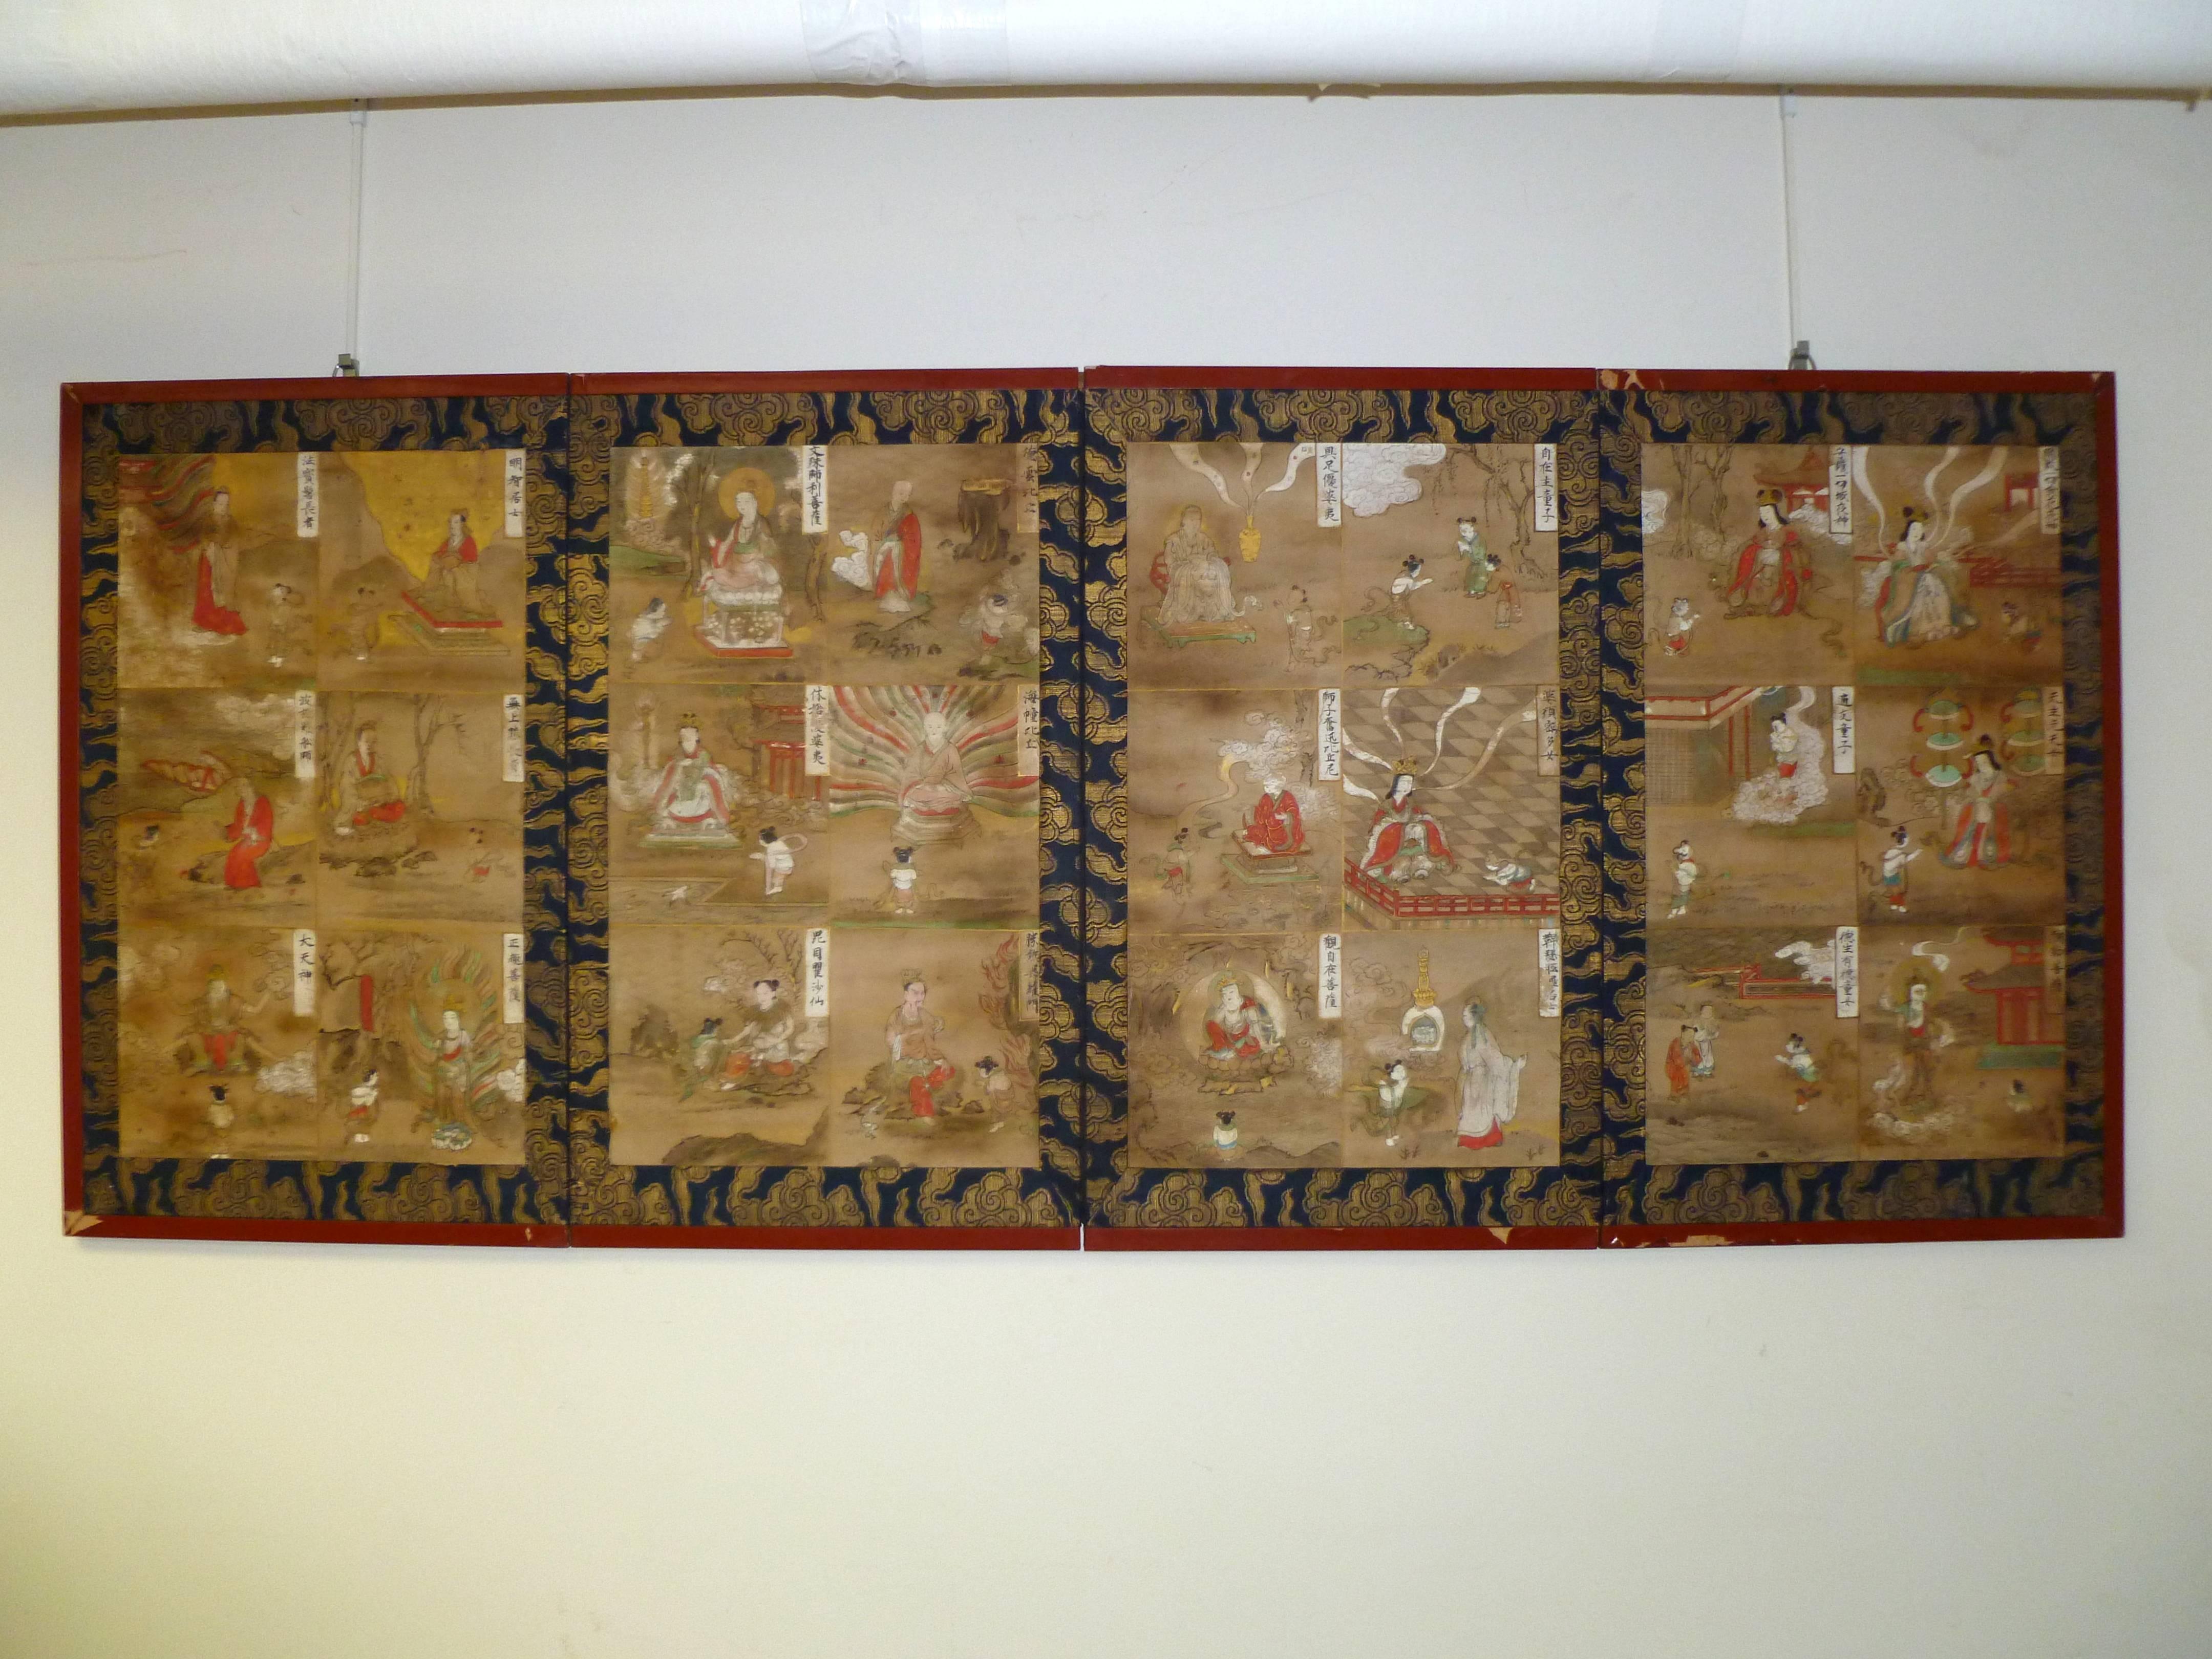 Japanese Buddhist teaching painting, set of four paintings with 24 Buddhist stories with Japanese written characters in each story on one screen. Provenance: Purchased from Christie's South Kensington, UK in late 1990s.